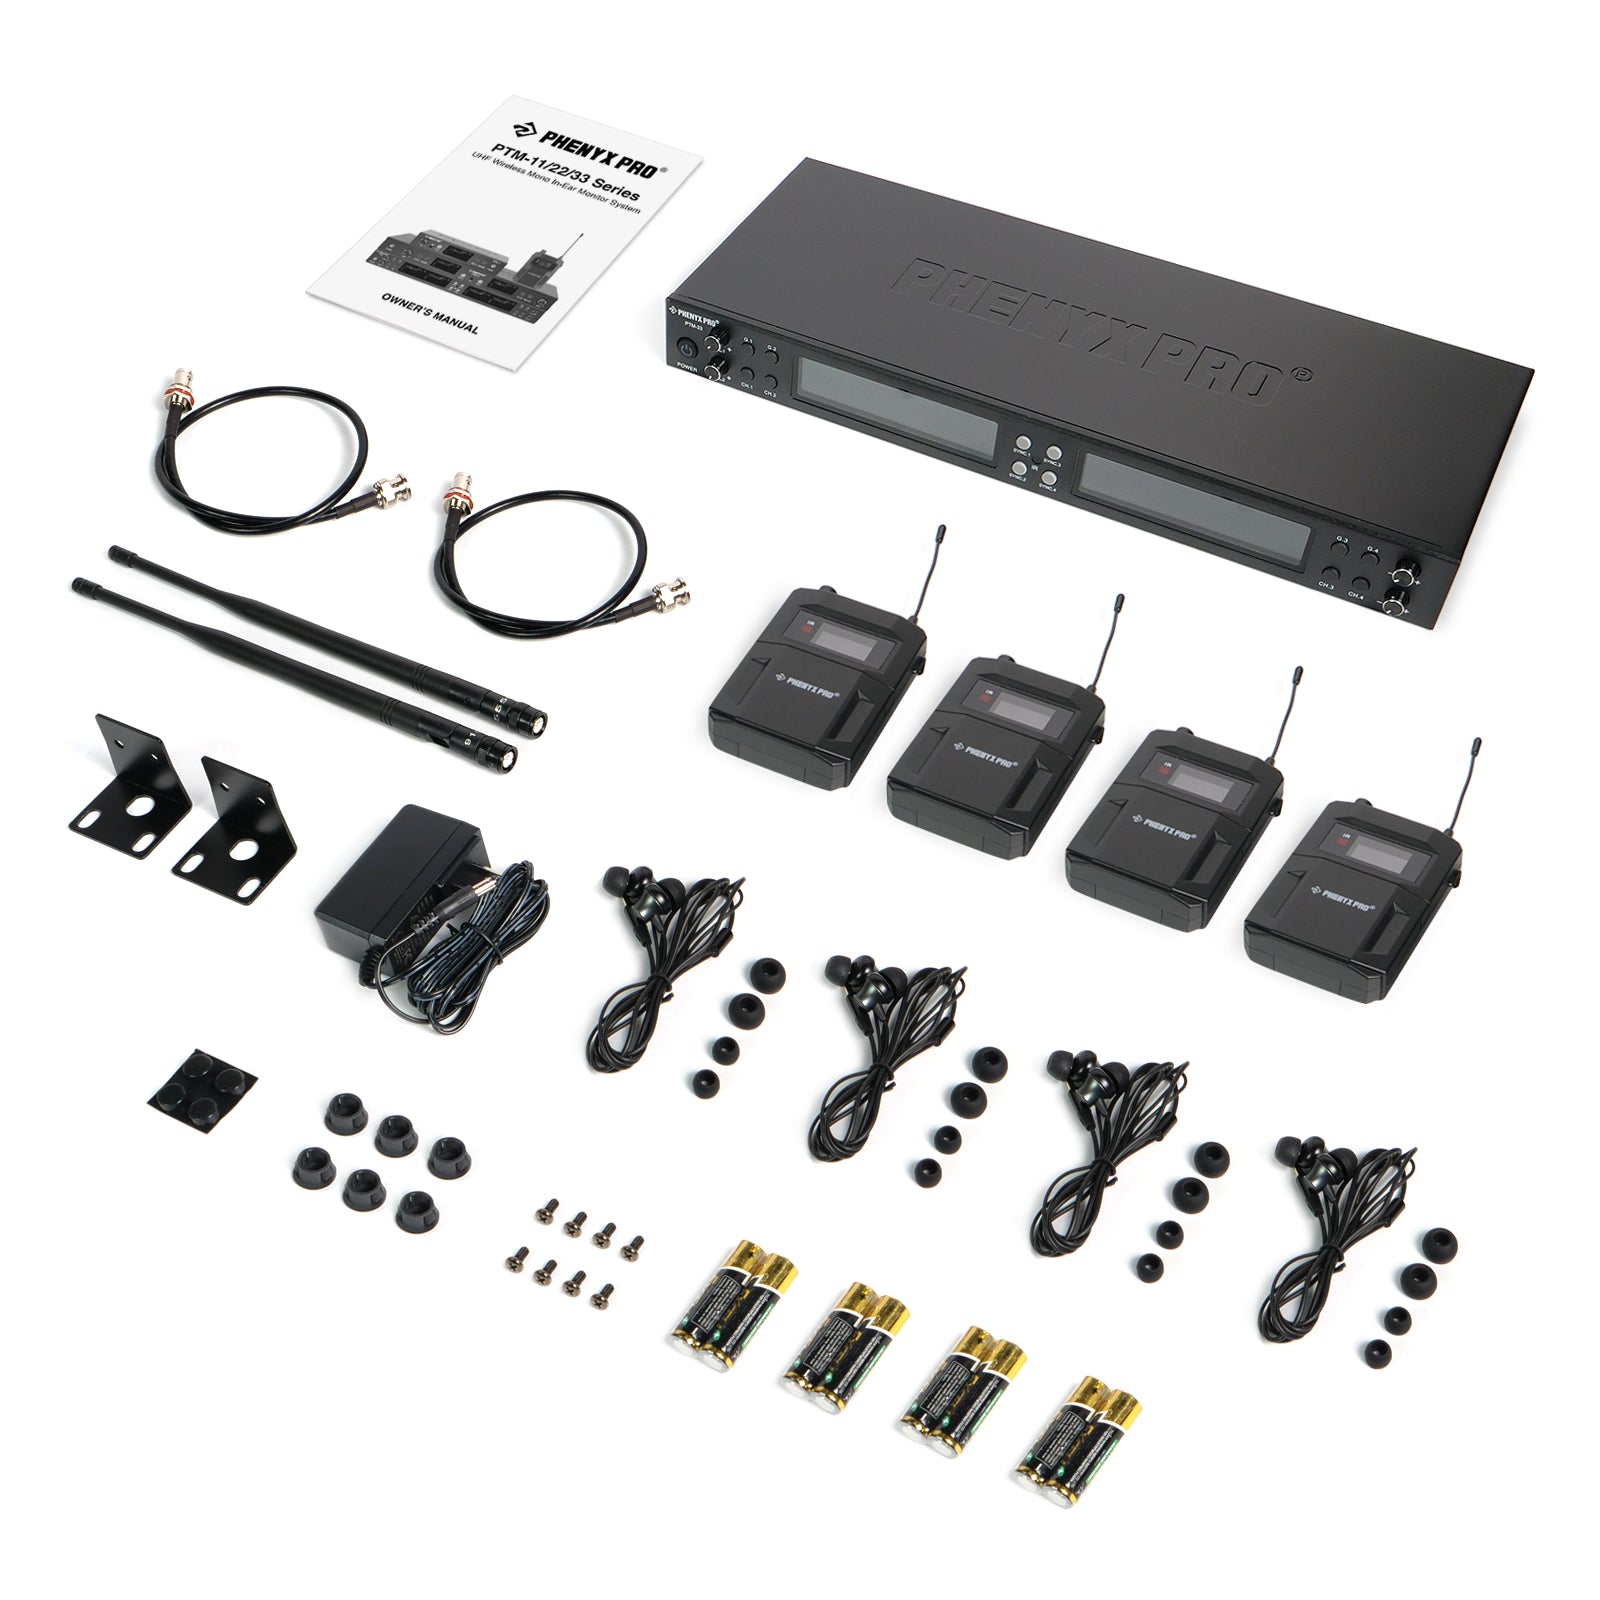 PTM-33-4B | UHF Mono Wireless In-Ear Monitor System w/ 4 Loop Outputs